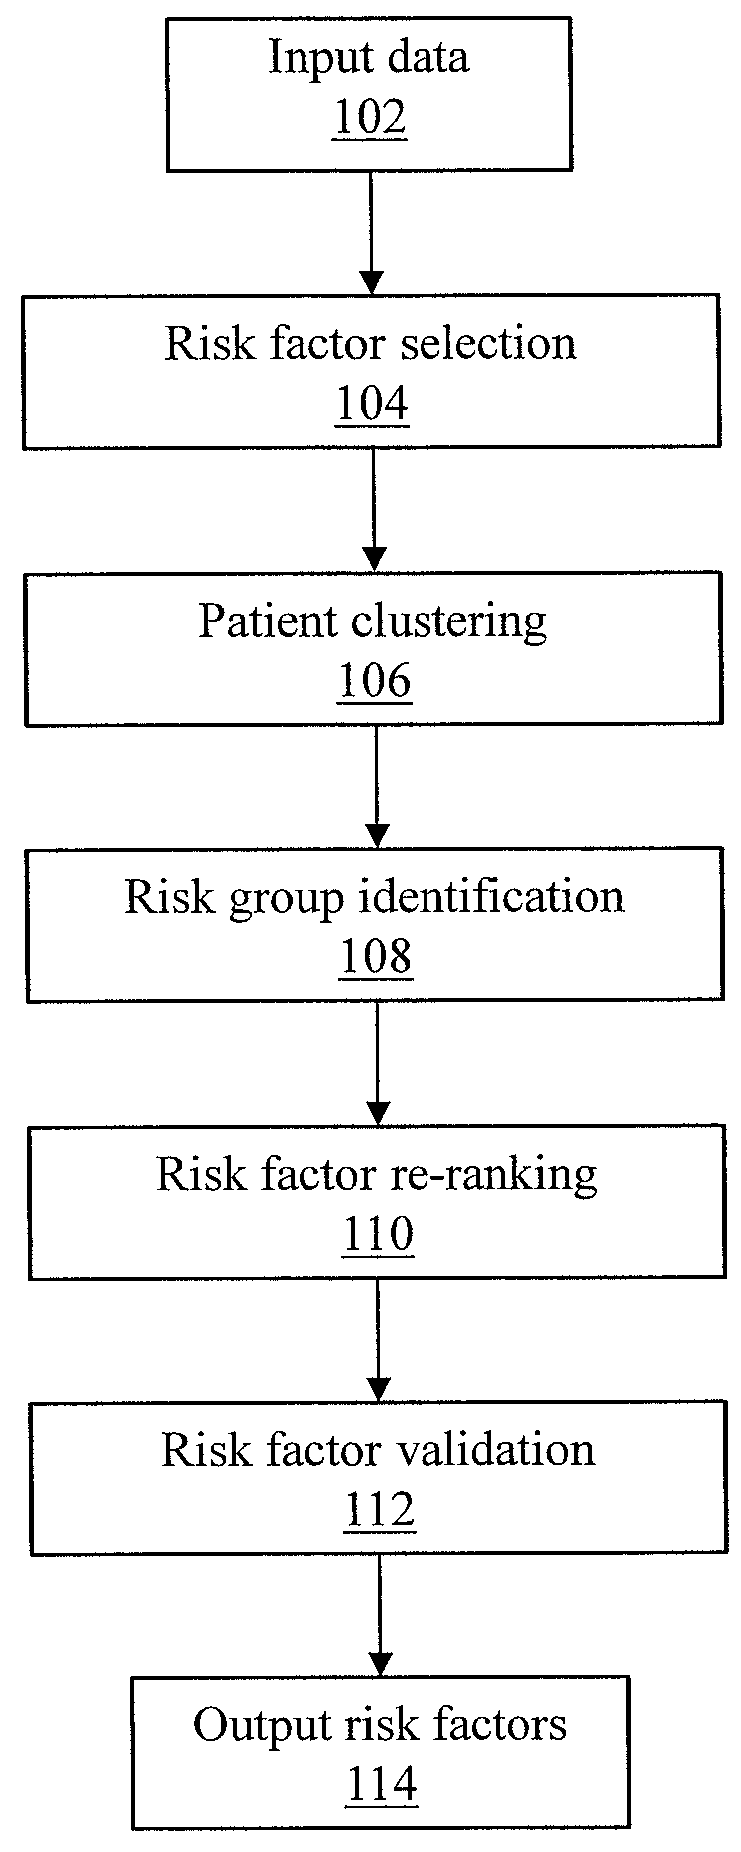 Identifying group and individual-level risk factors via risk-driven patient stratification